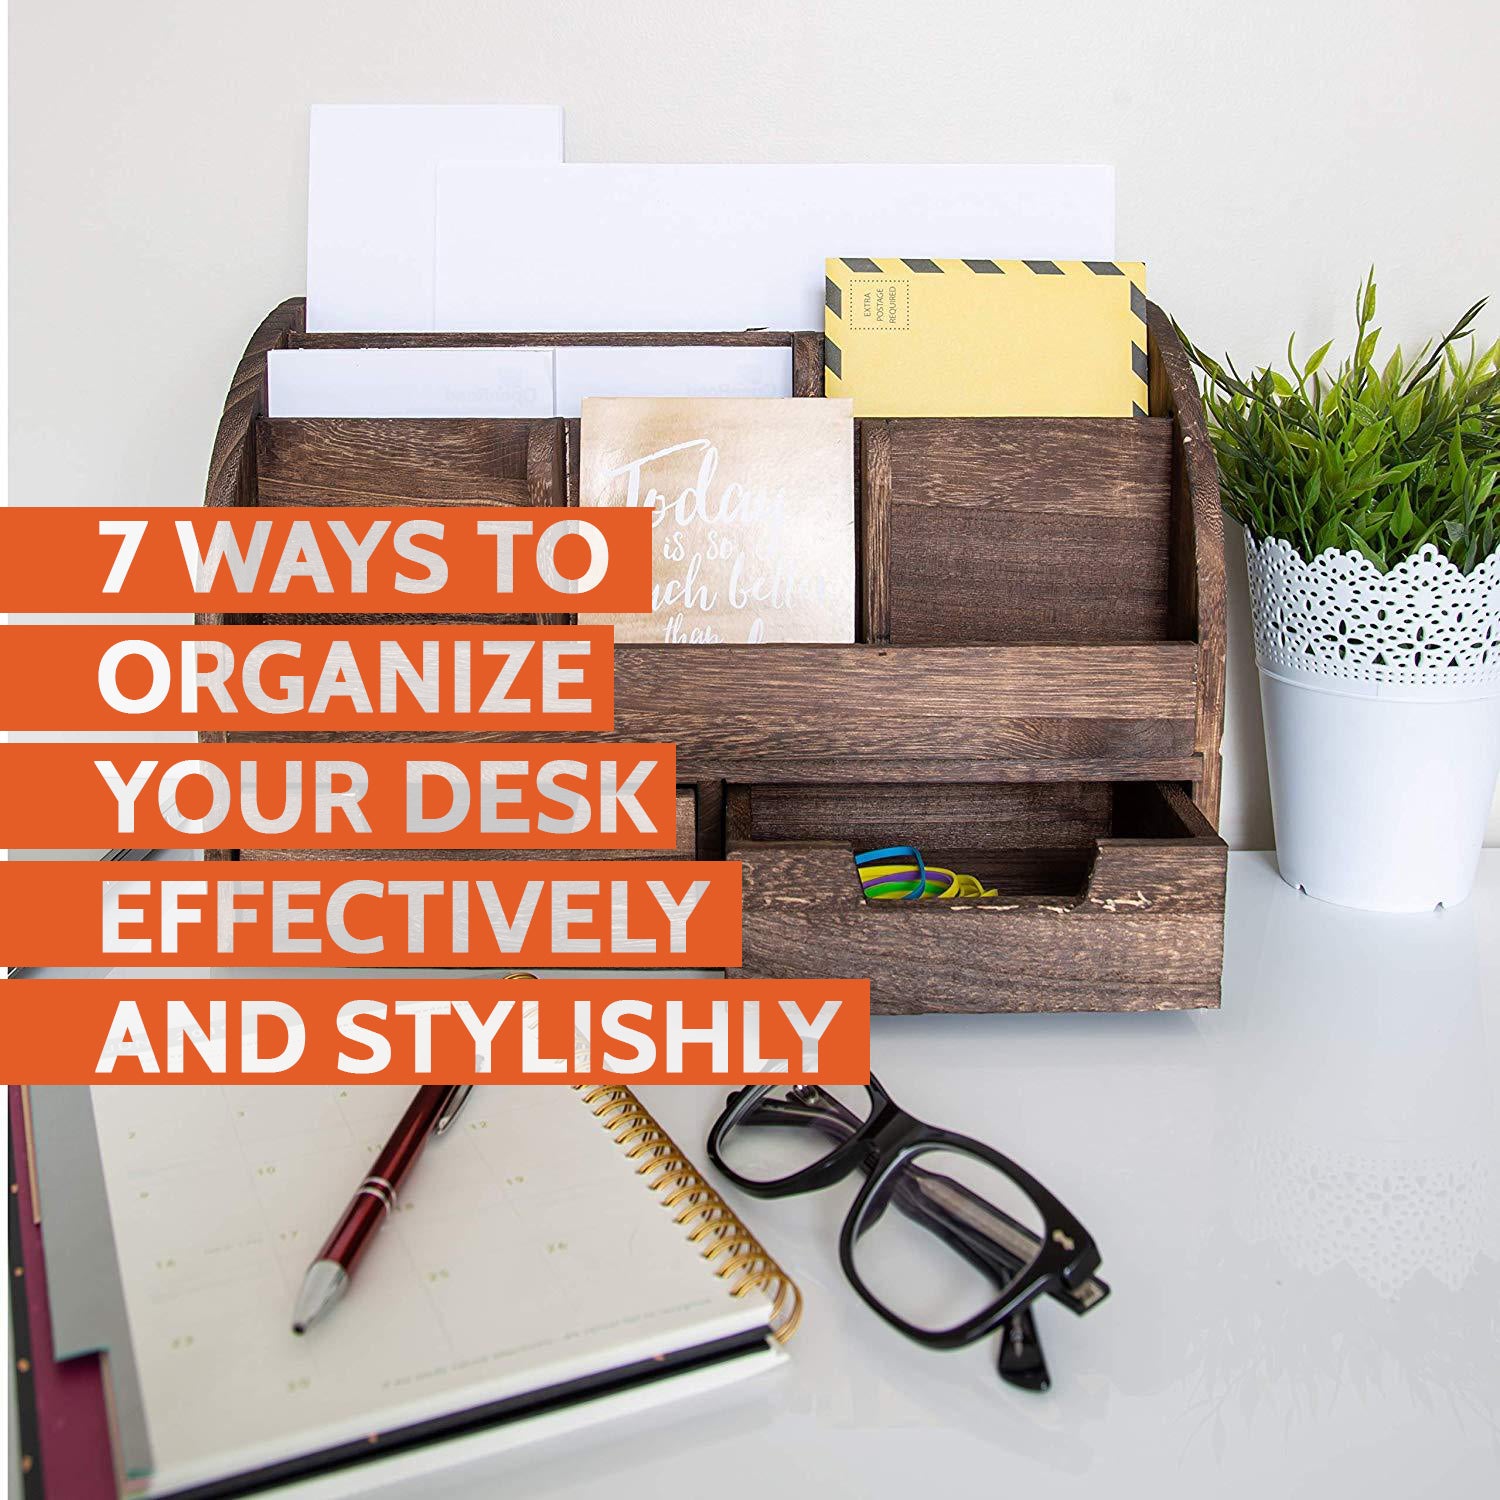 7 Ways to organize your desk effectively and stylishly